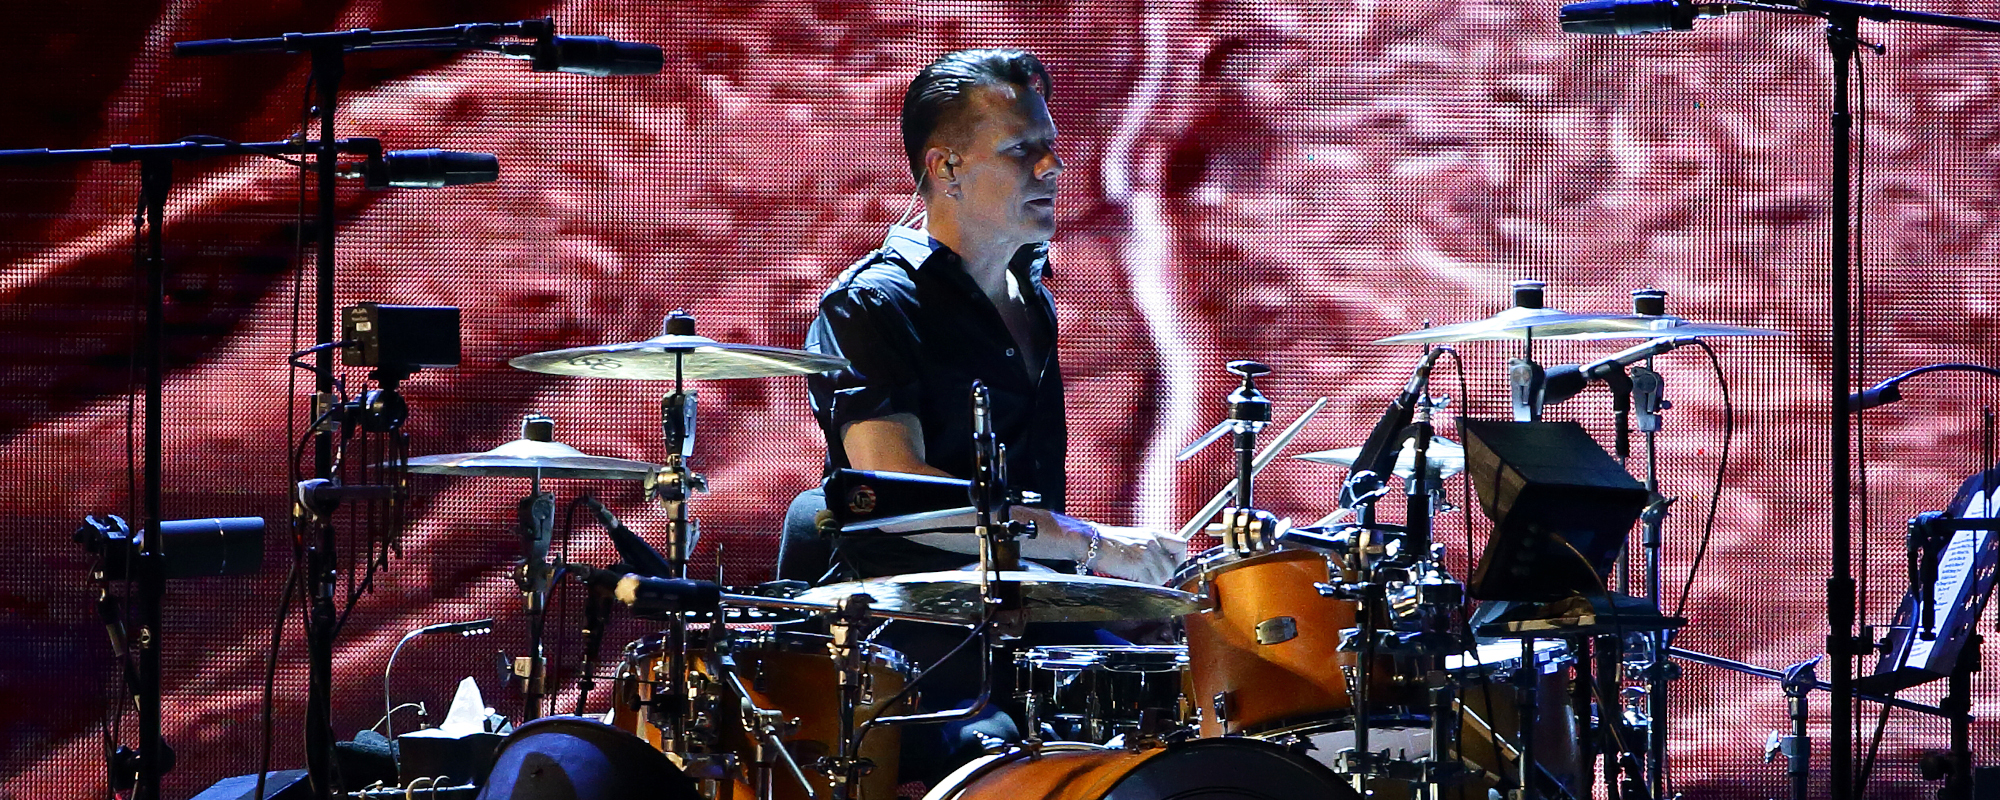 Why Is Larry Mullen Not Performing at U2's Las Vegas Residency? The U2  Drummer's Injuries and Surgery, Explained